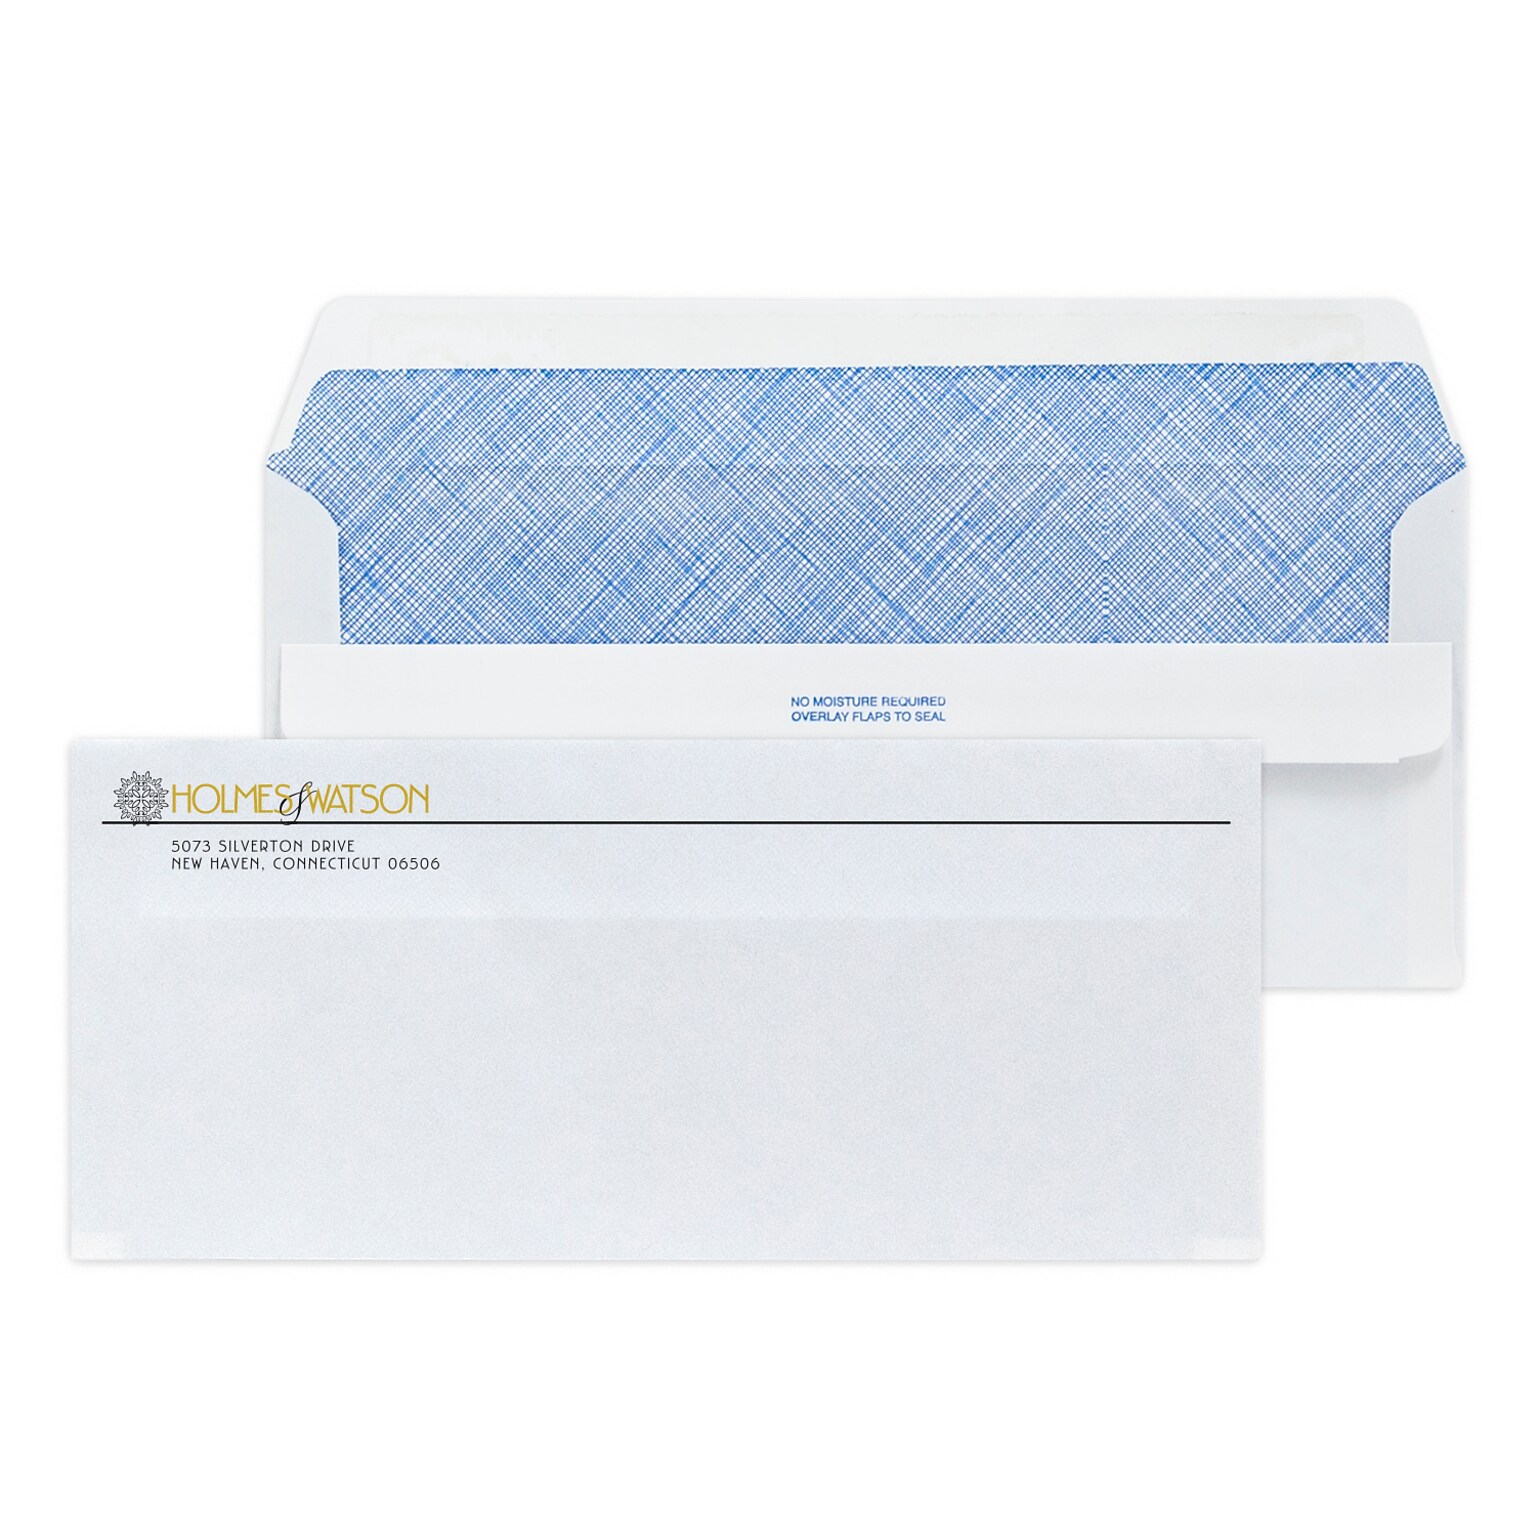 Custom #10 Self Seal Envelopes with Security Tint, 4 1/4 x 9 1/2, 24# White Wove, 1 Standard and 1 Custom Inks, 250 / Pack